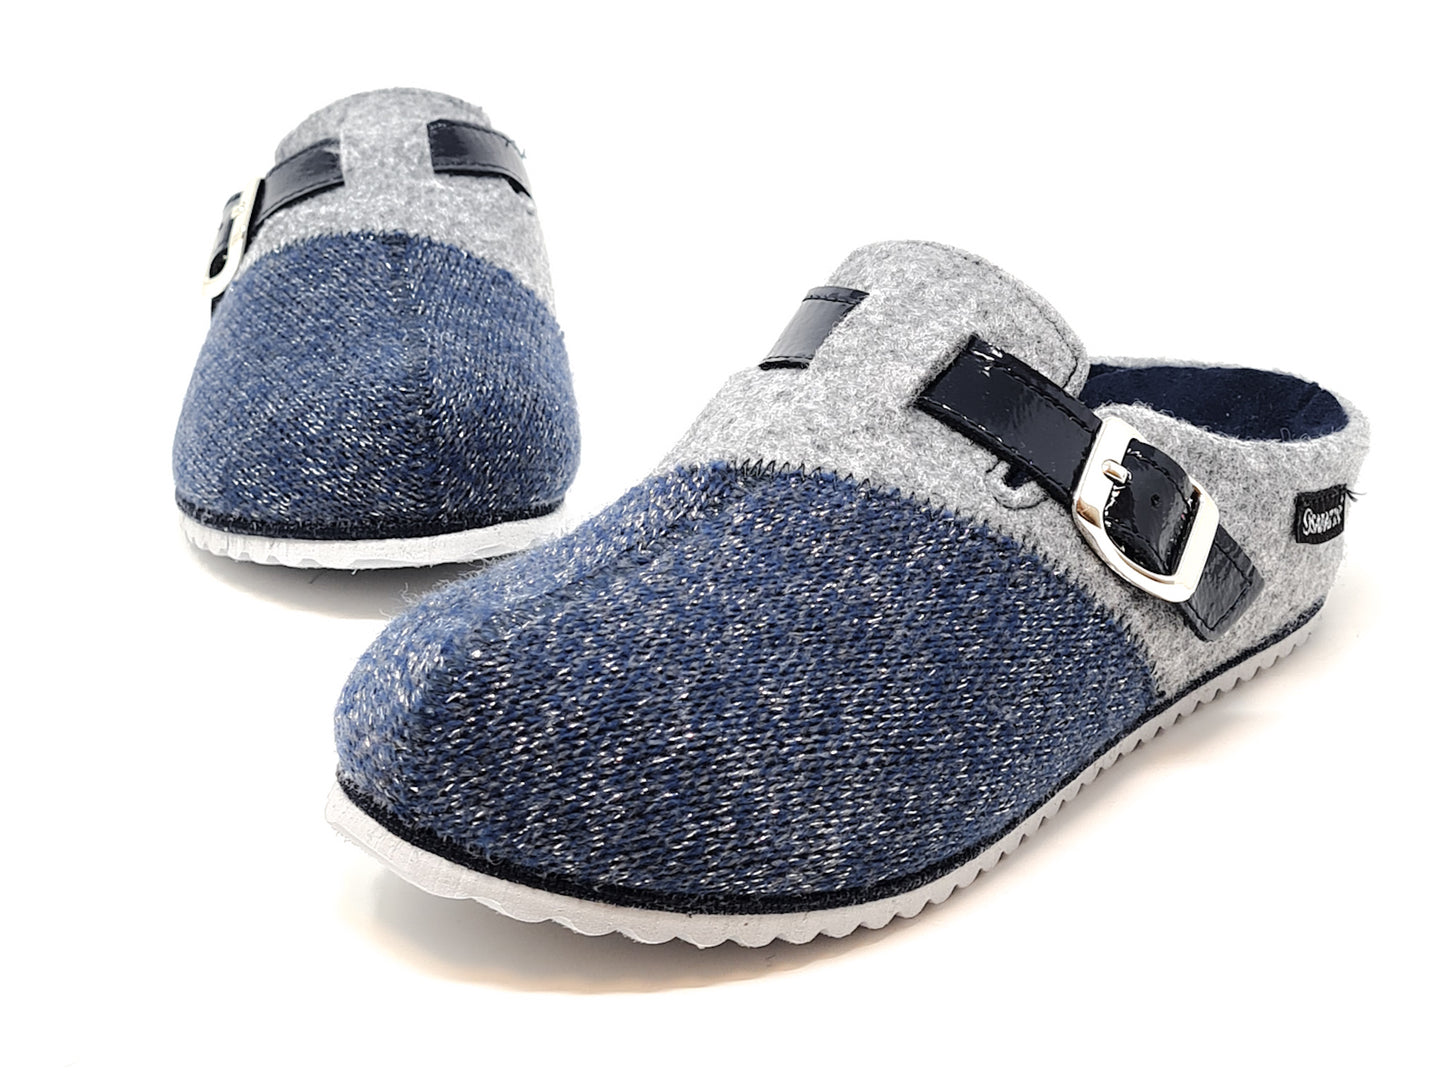 Slipper with removable footbed